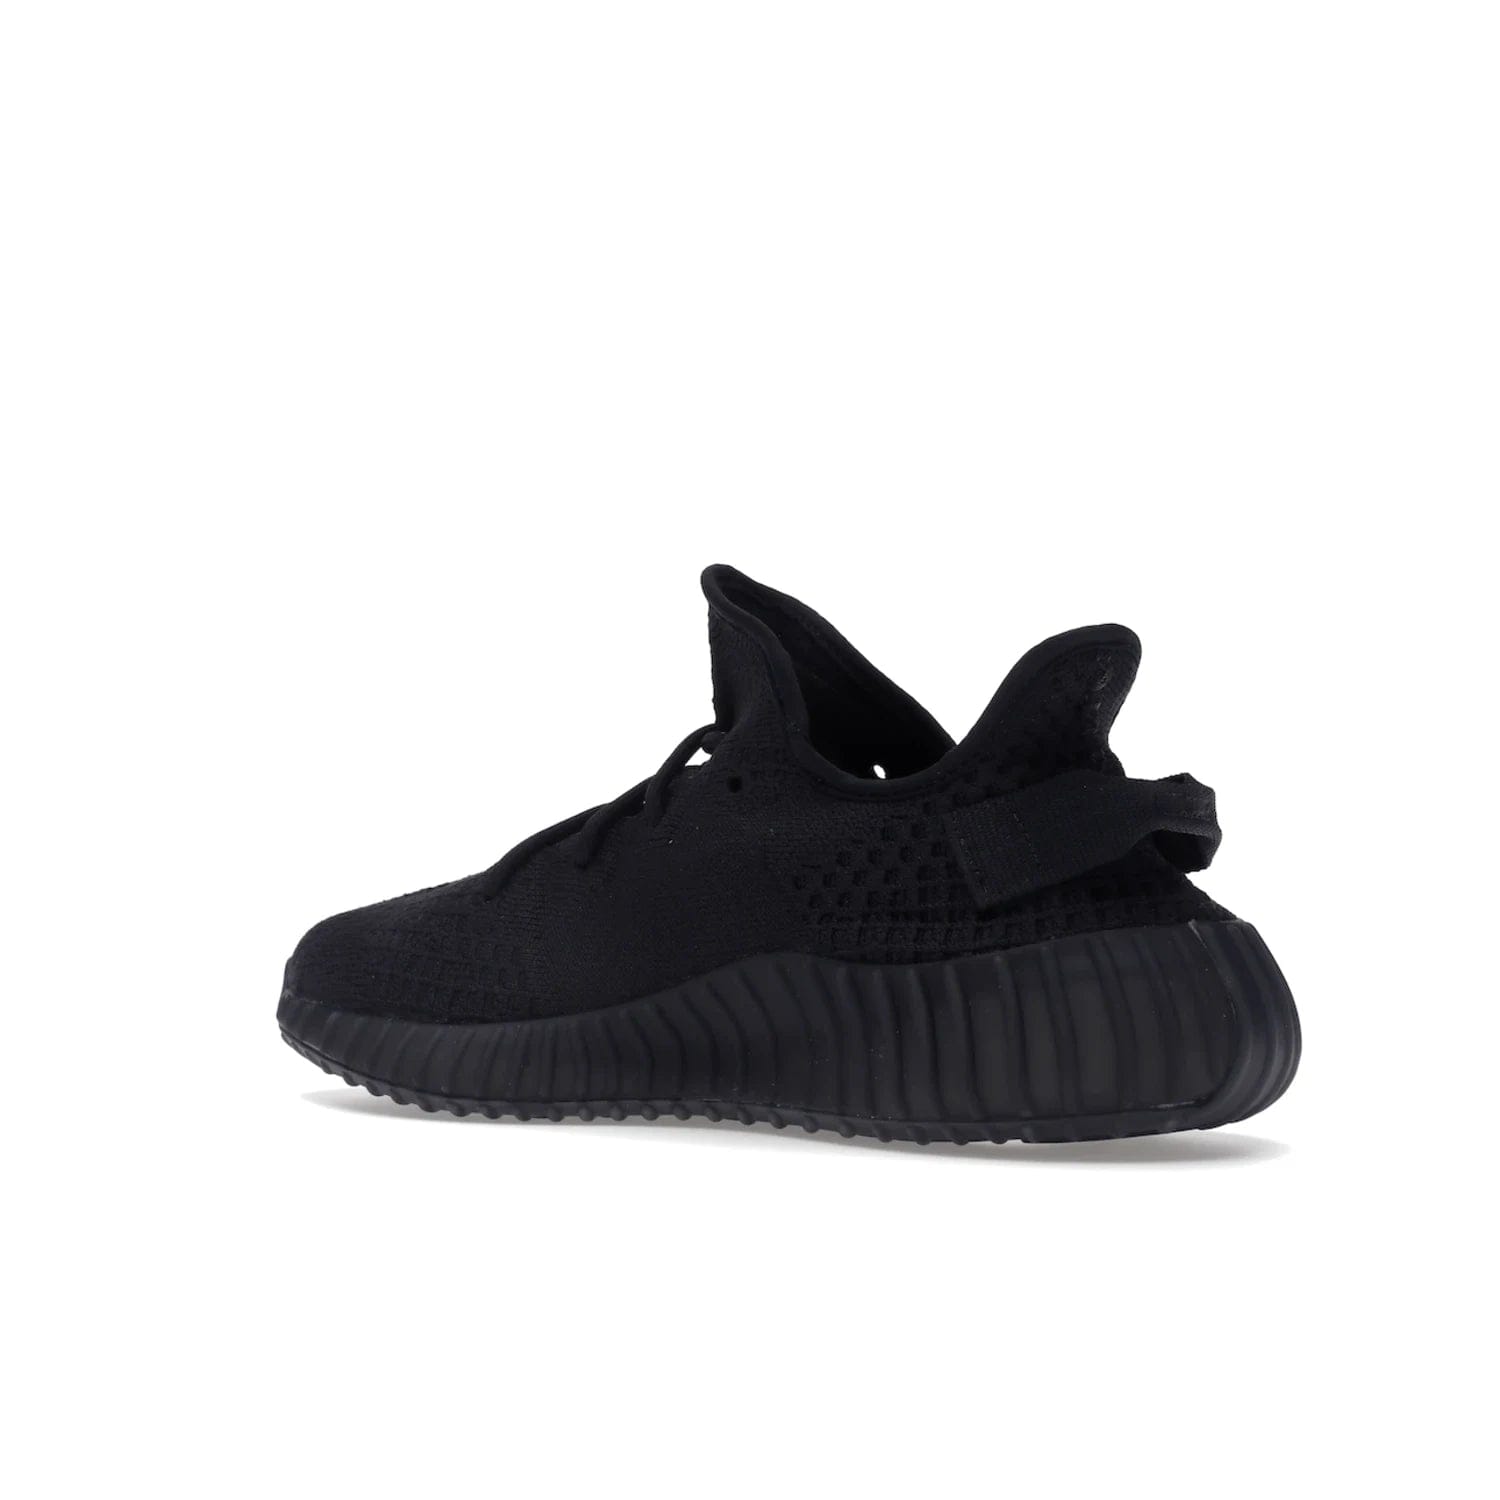 adidas Yeezy Boost 350 V2 Onyx - Image 23 - Only at www.BallersClubKickz.com - Adidas Yeezy Boost 350 V2 Onyx Triple Black shoes for comfort and style. Arriving Spring 2022.